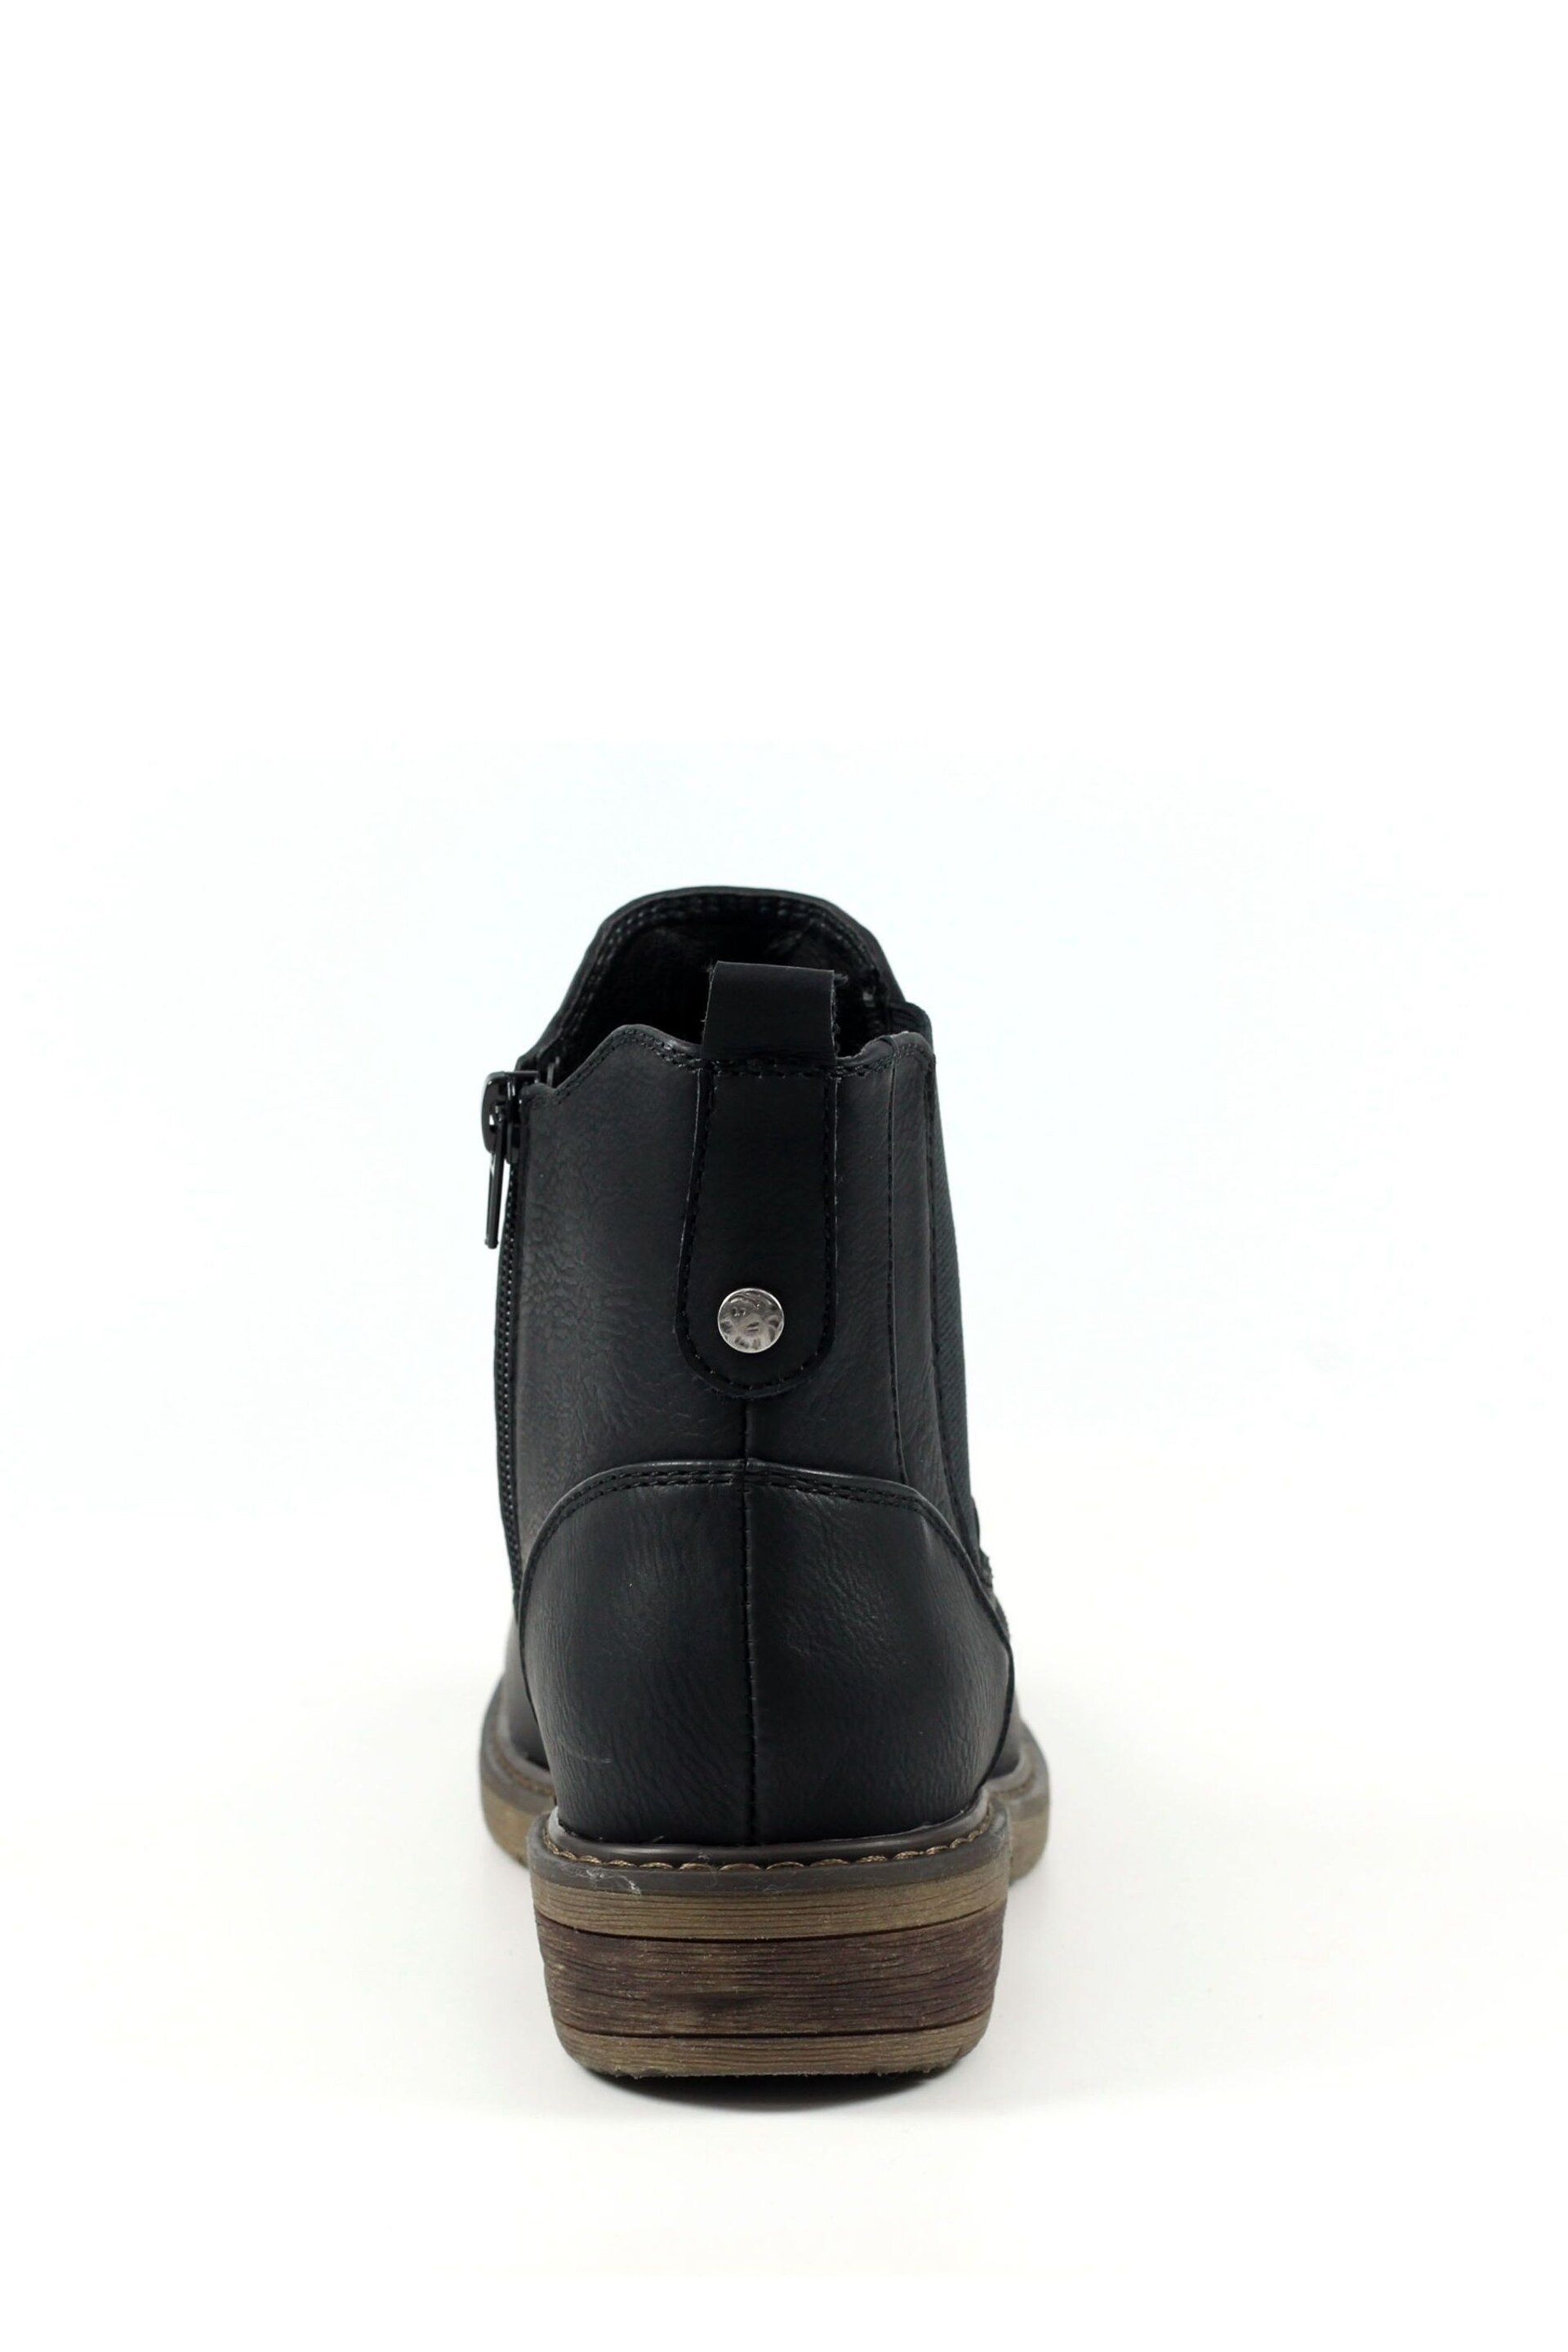 Lunar Roxie II Black Ankle Boots - Image 5 of 8